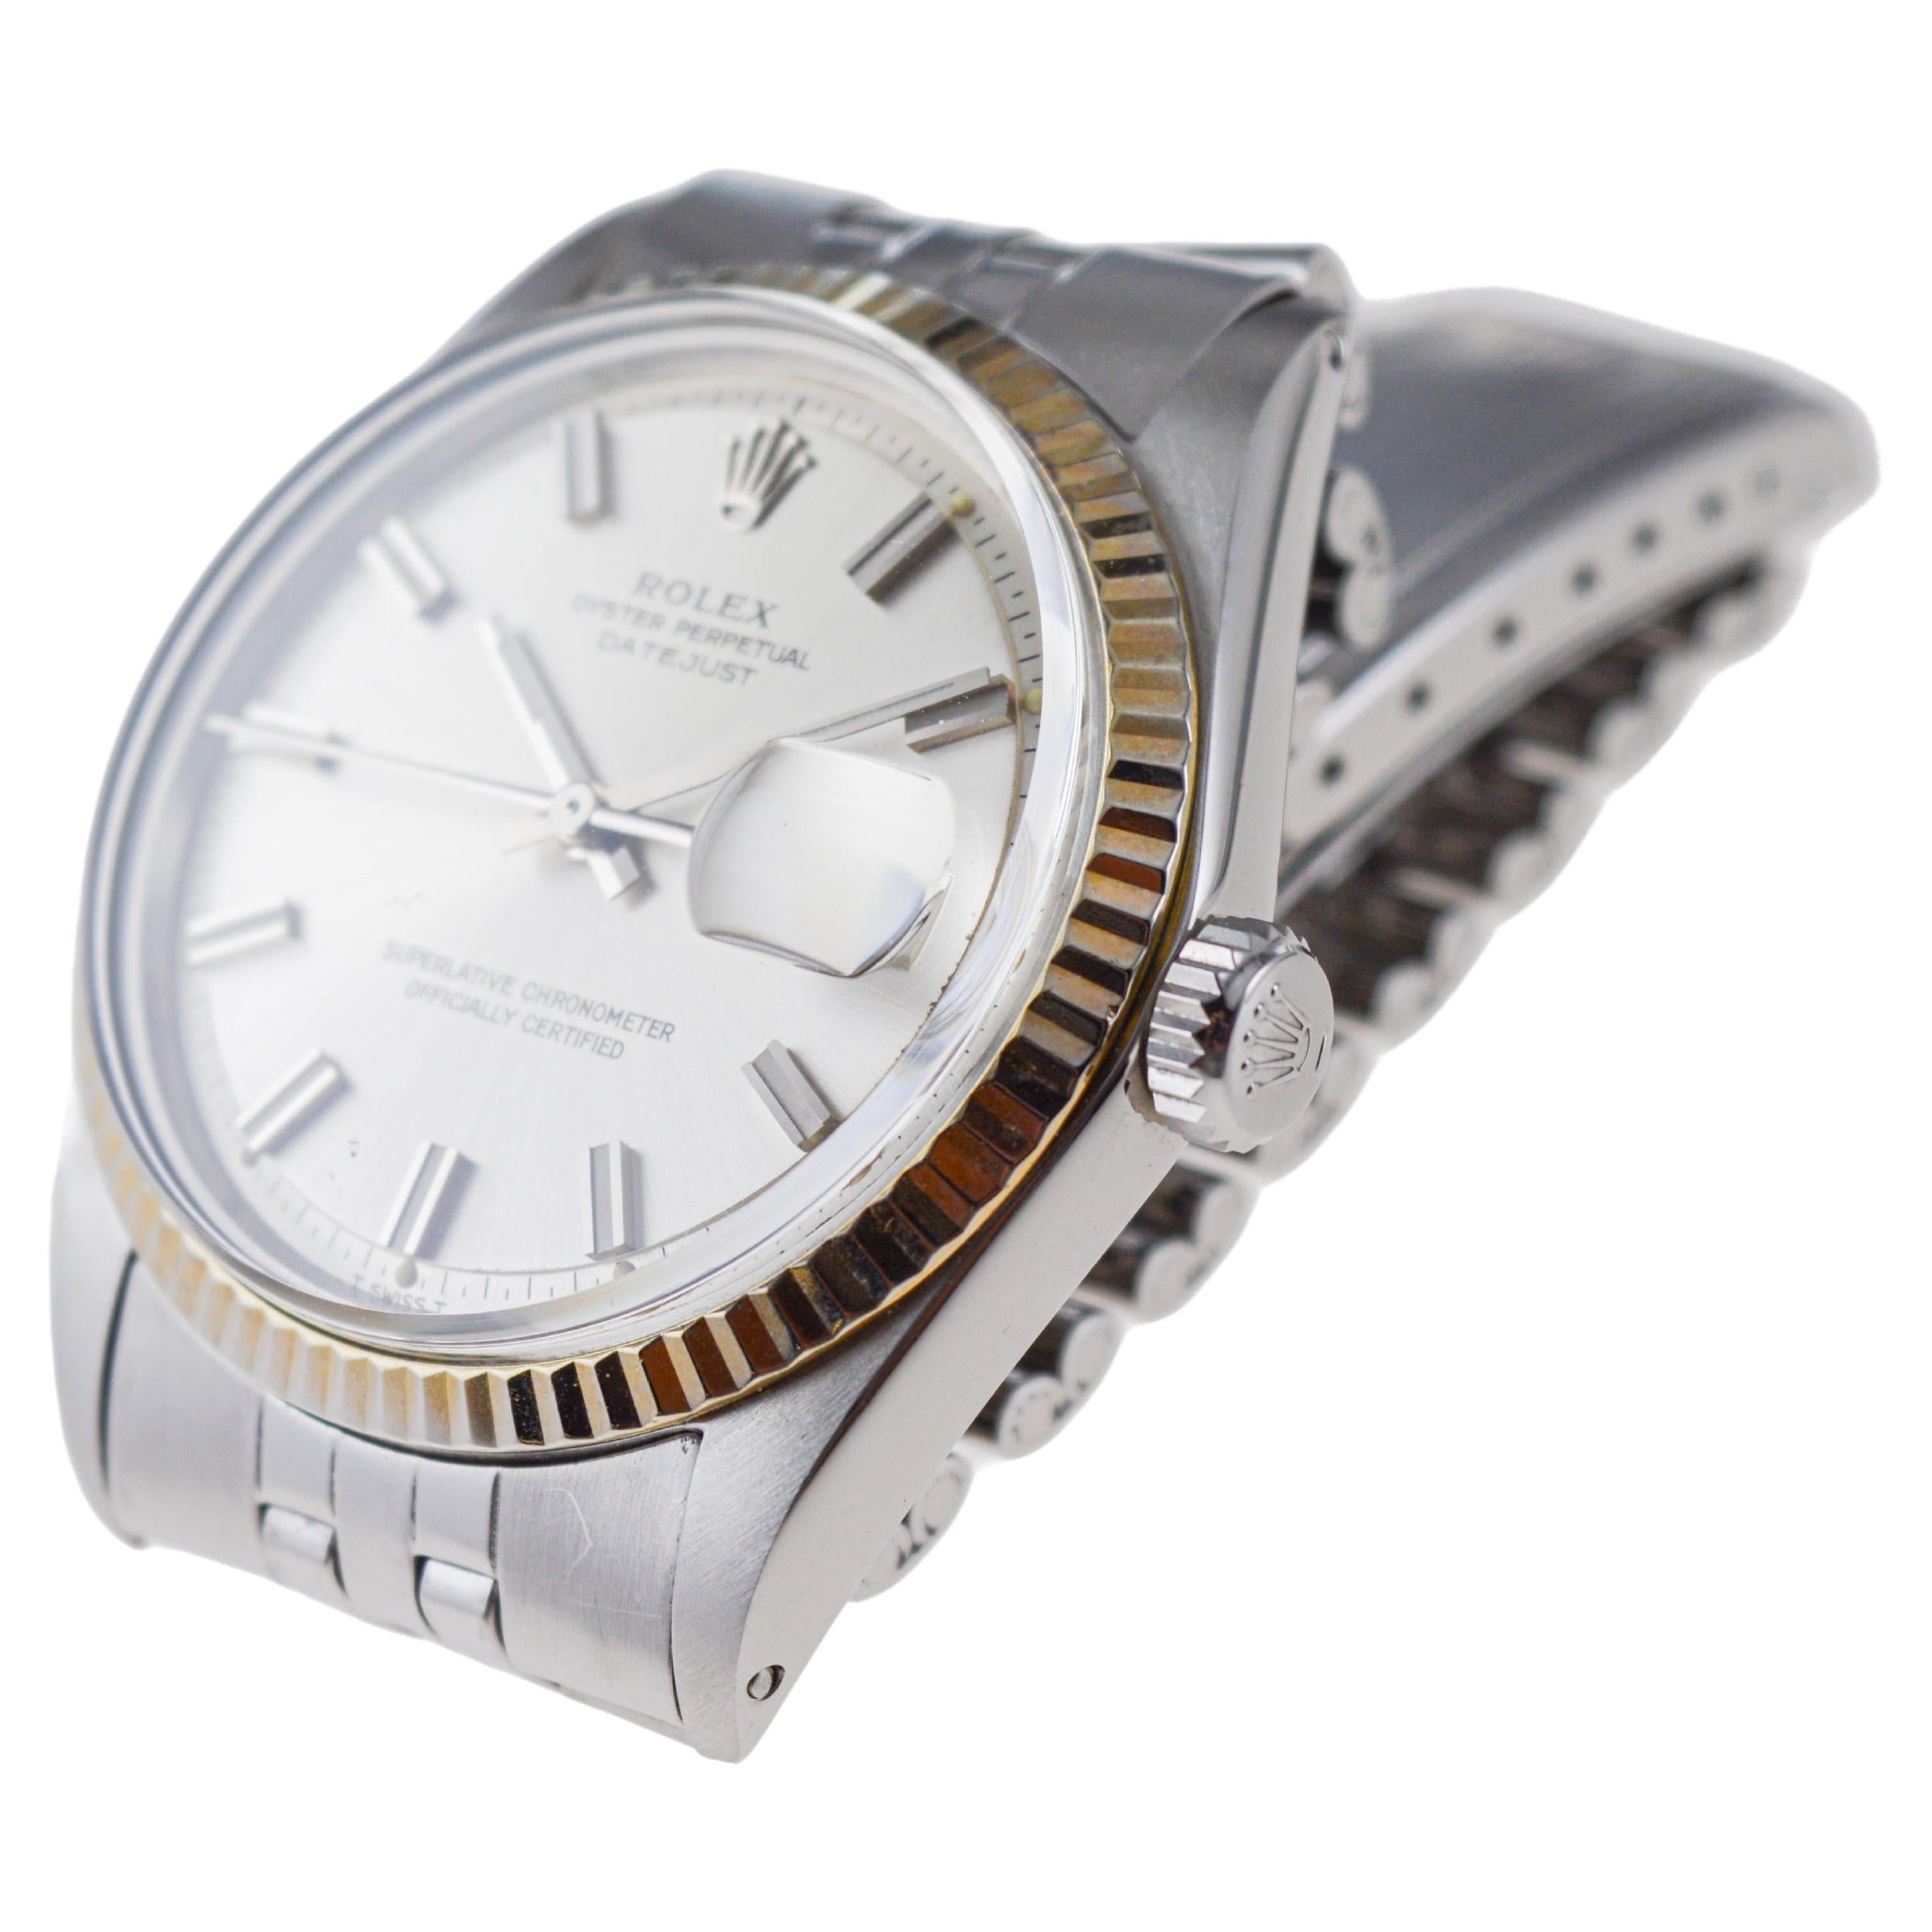 Rolex Steel Datejust with Original Silvered Dial And Papers circa, 1970's For Sale 4